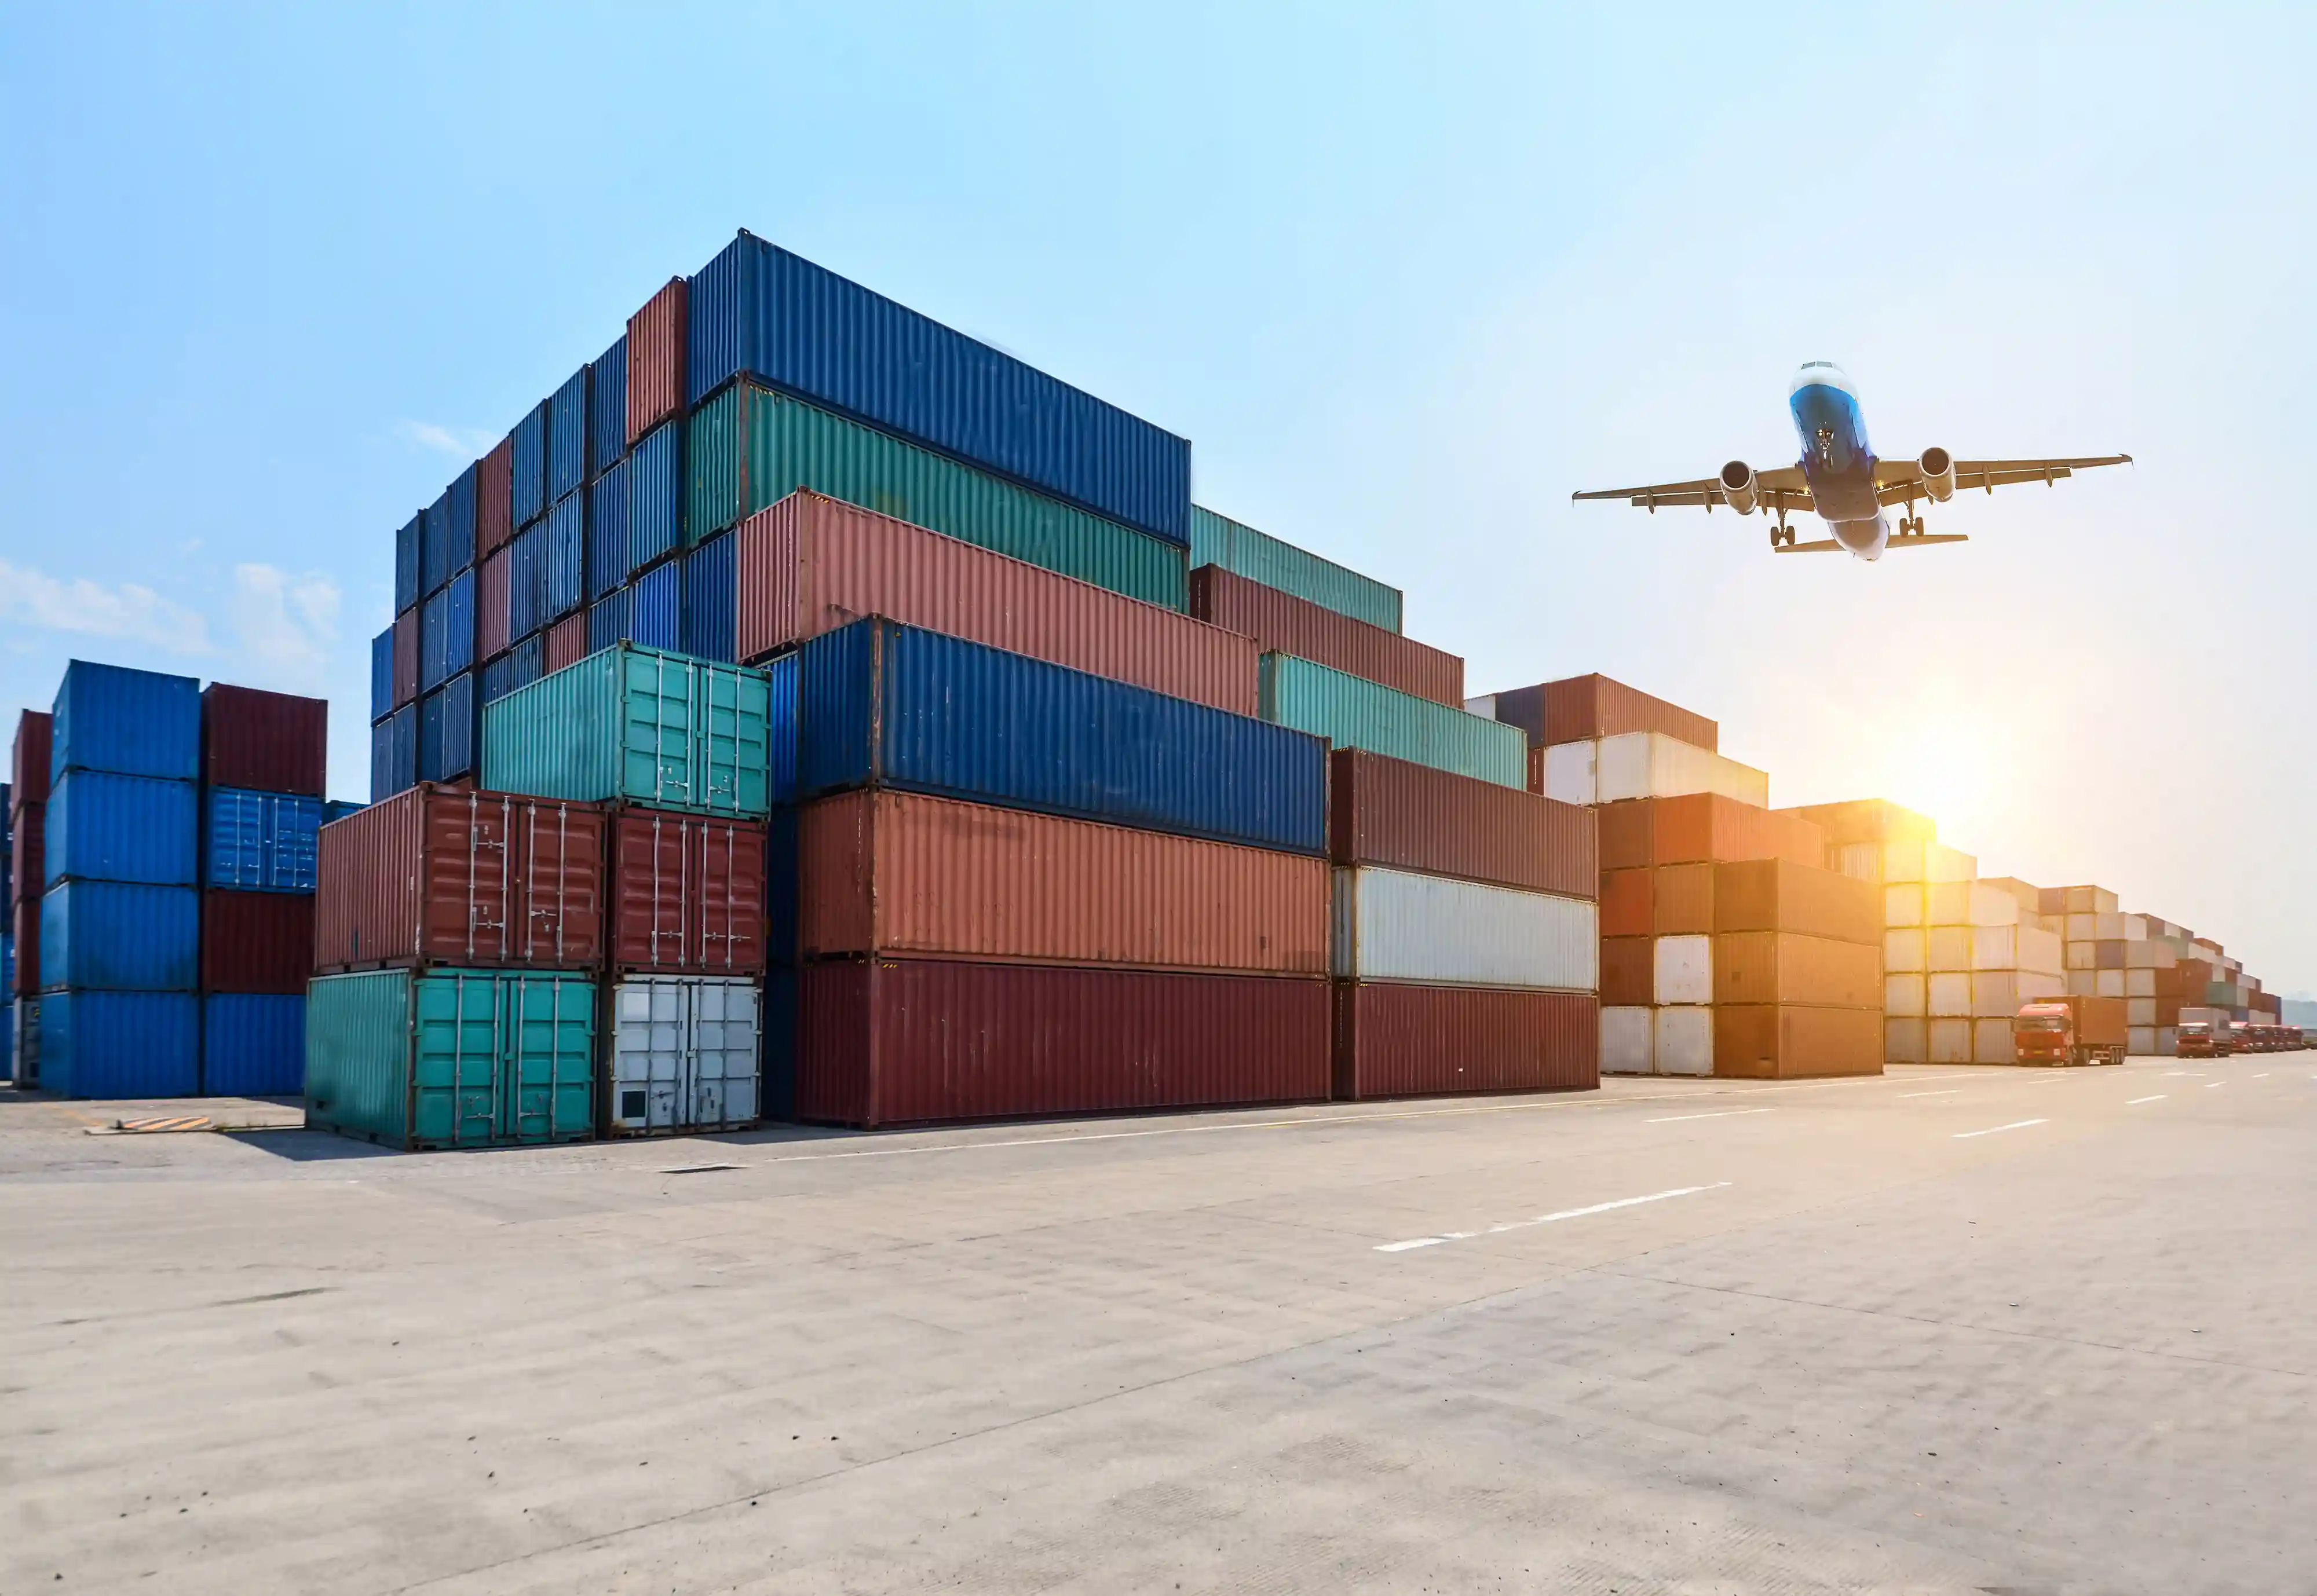 We provide both domestic and international air and ocean freight services to companies of all sizes.